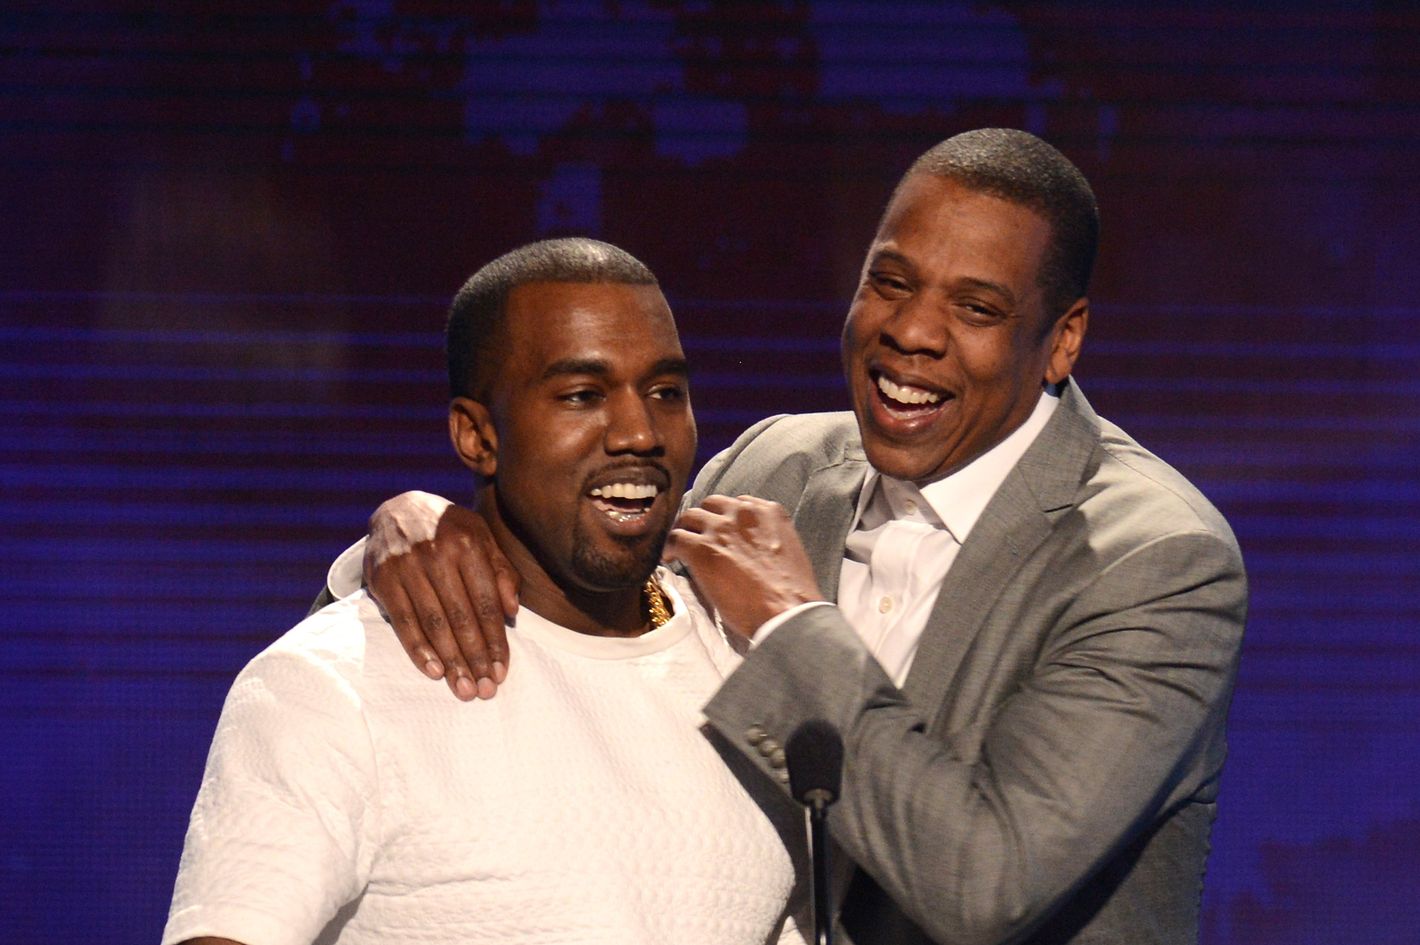 Kanye and Jay-Z Had a Long Dispute Over Some Magna Carta Songs